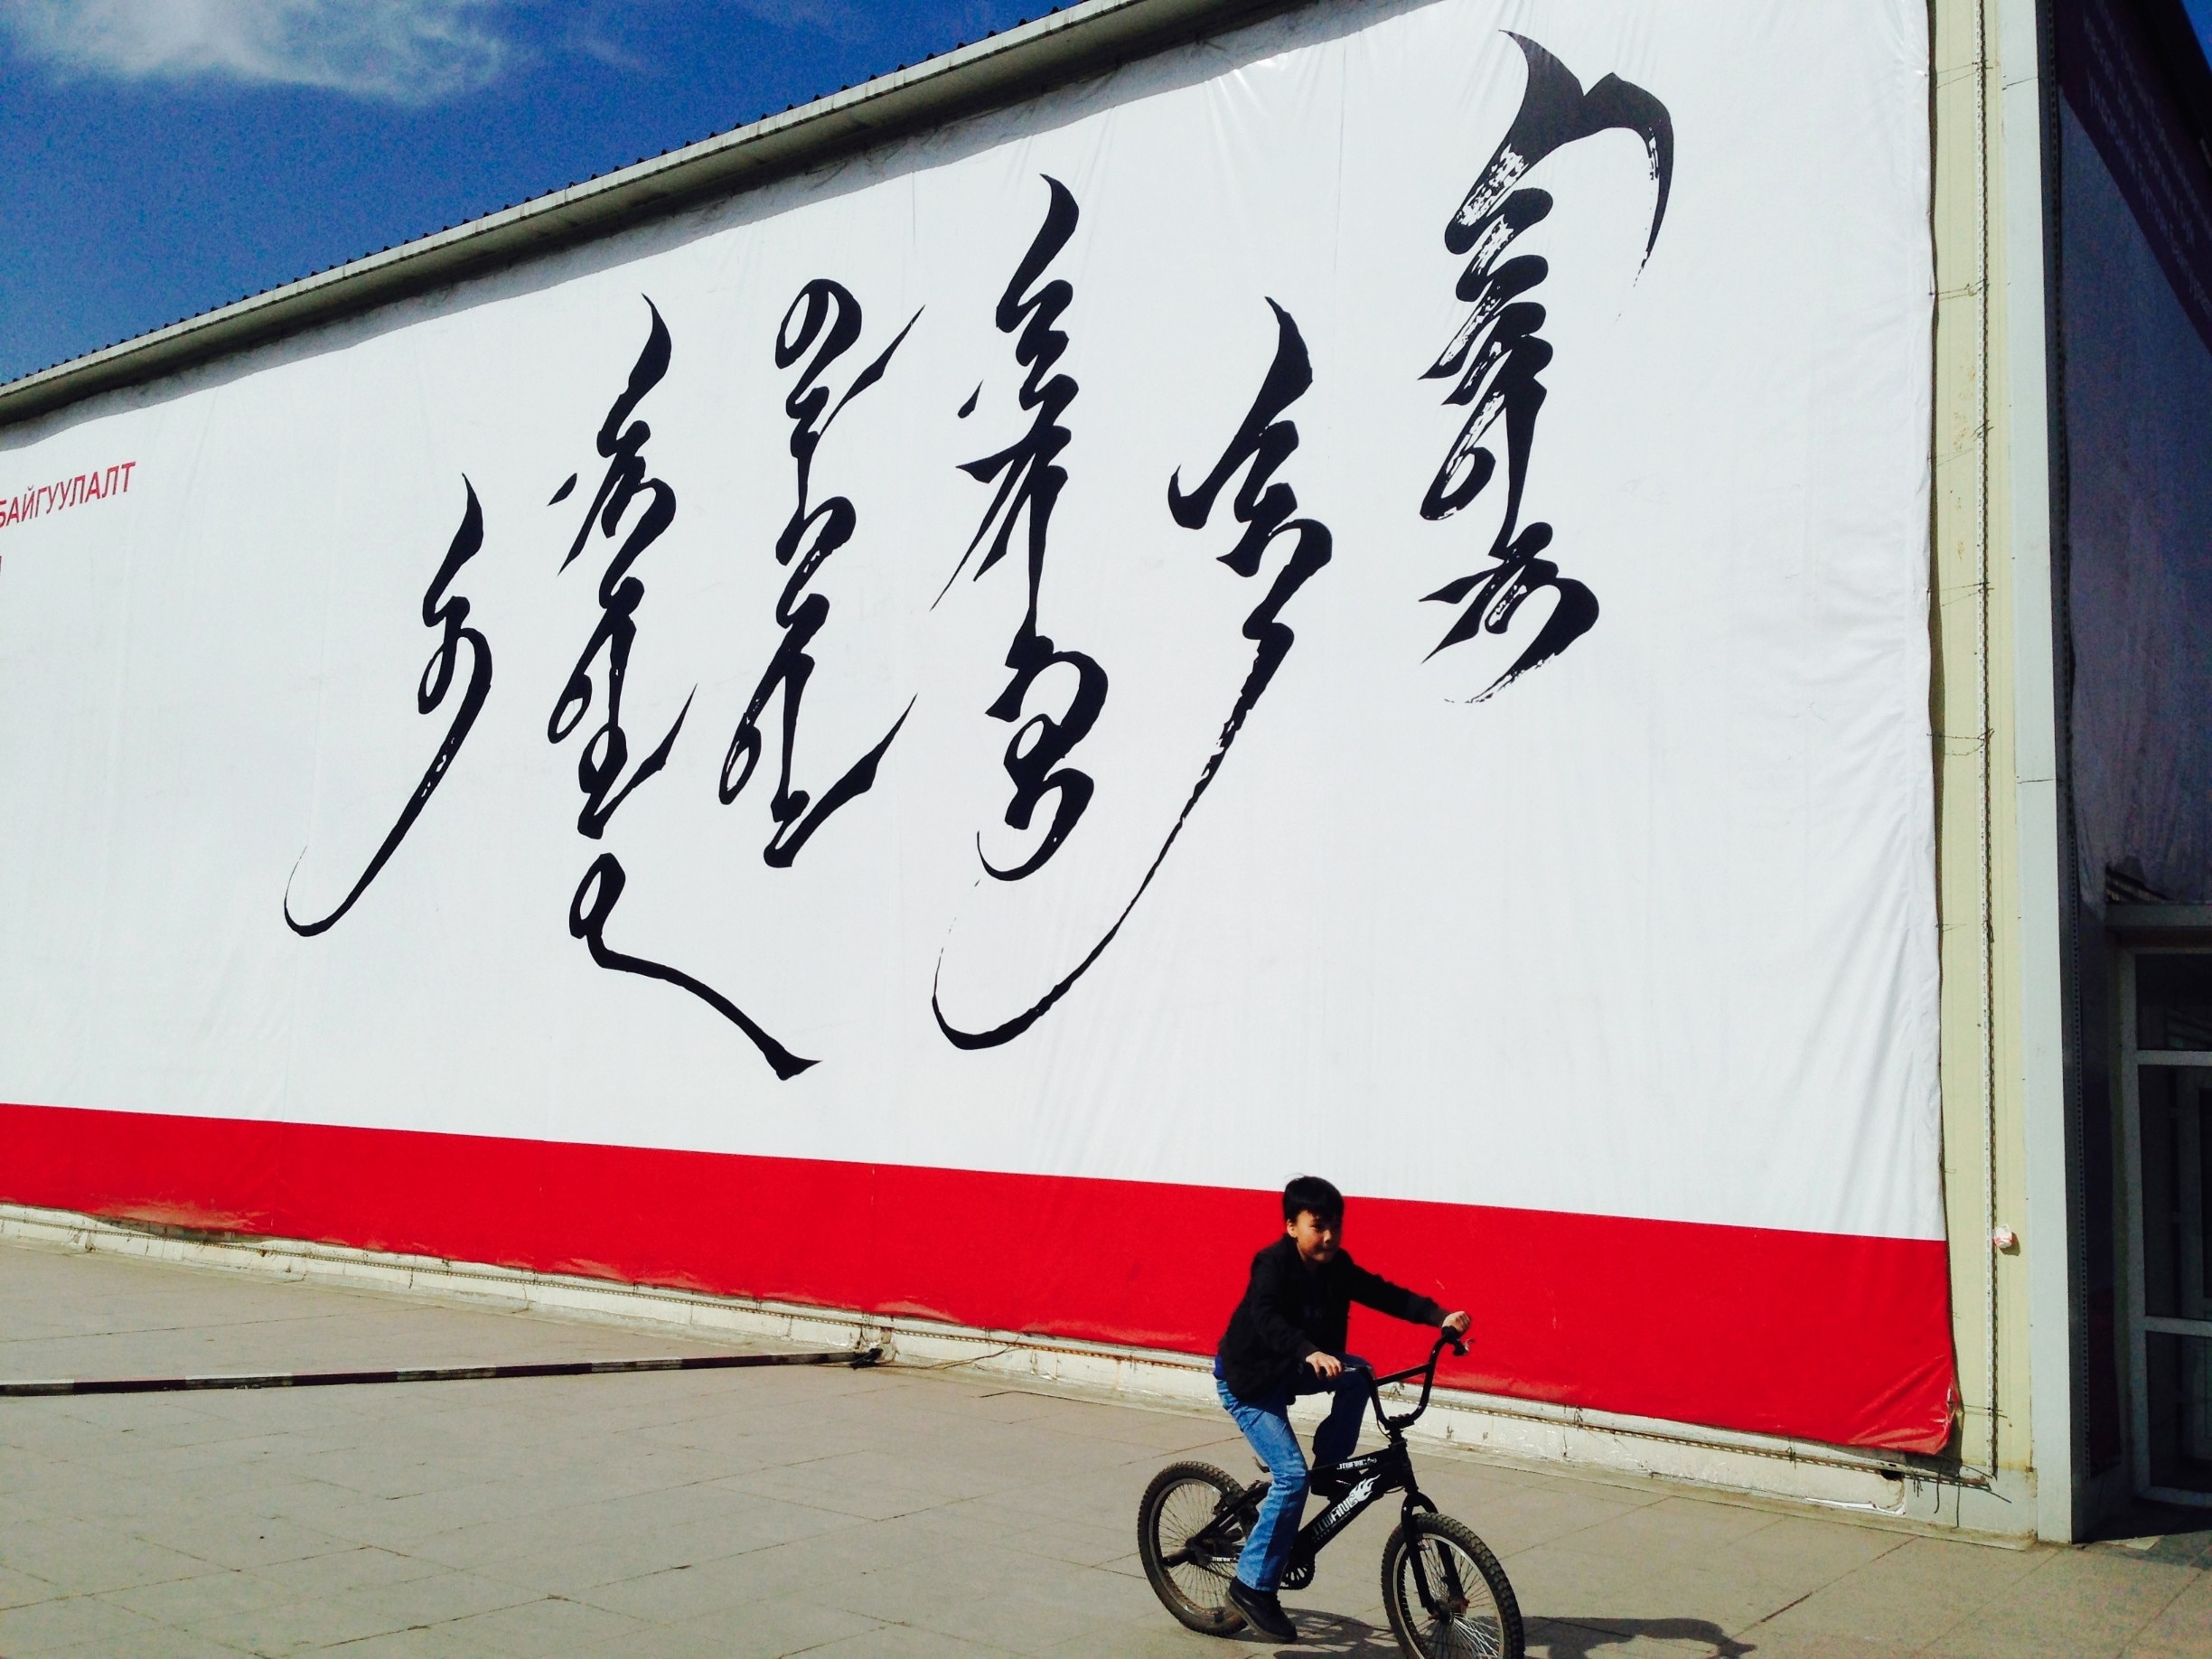 The old Mongolian script is pure poetic calligraphy. I have no idea what it says though. #calligraphy #cities